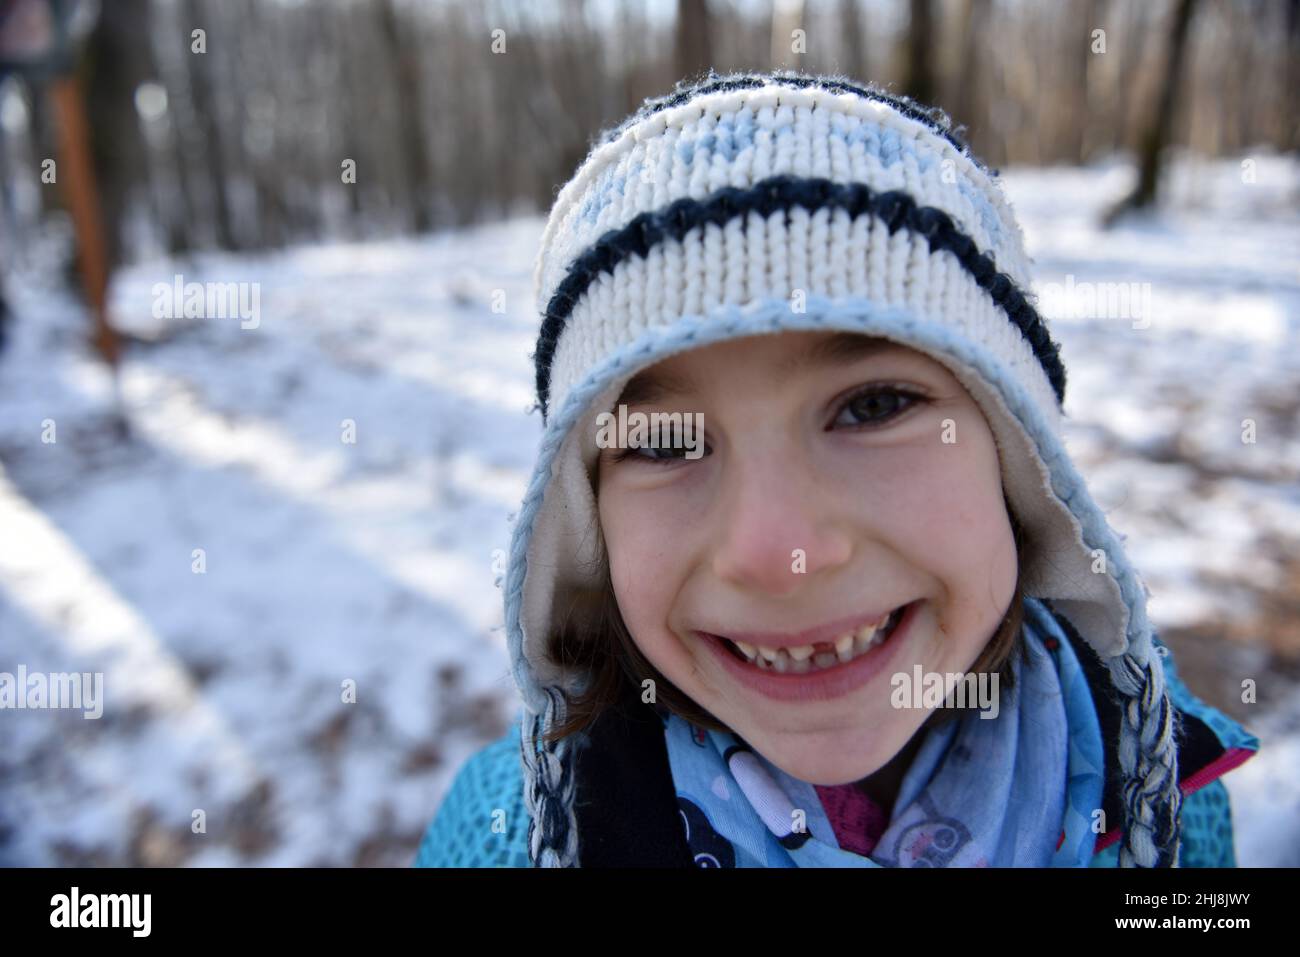 Child smiling and making a grimace showing her missing milk tooth Stock Photo